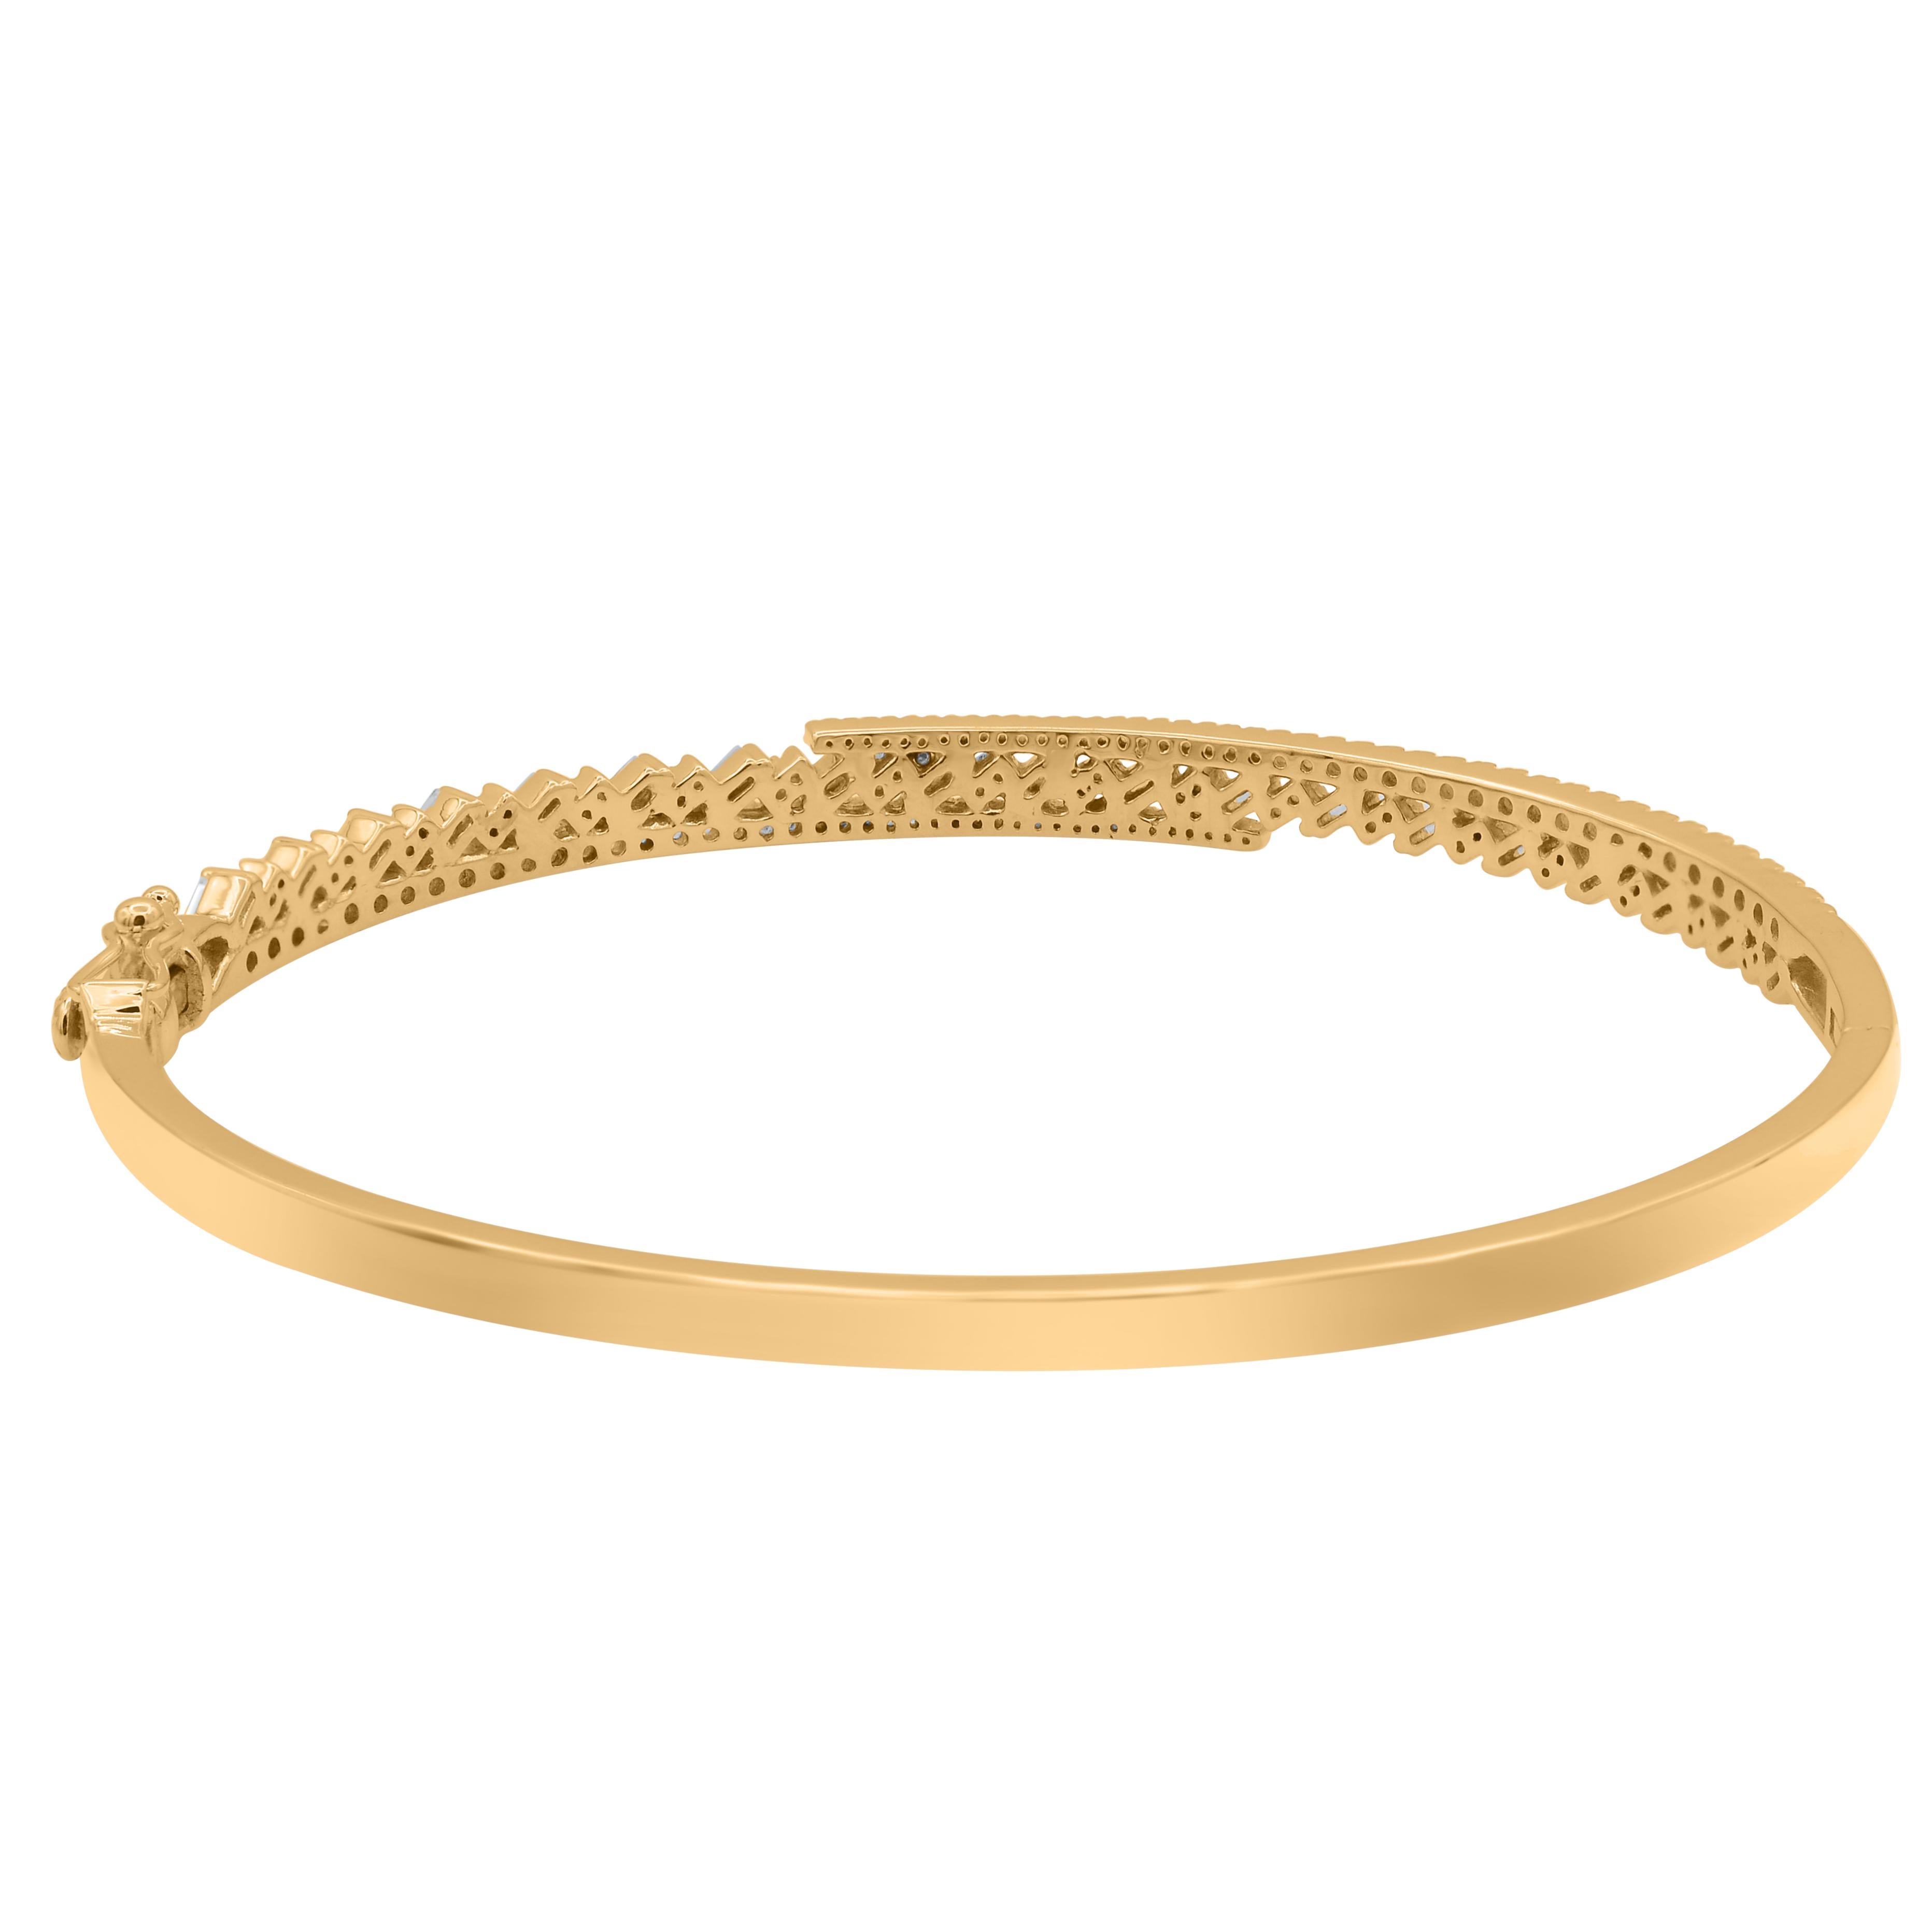 Contemporary TJD 1.0 Ct Natural Round & Baguette Diamond Bangle Bracelet in 18KT Yellow Gold For Sale